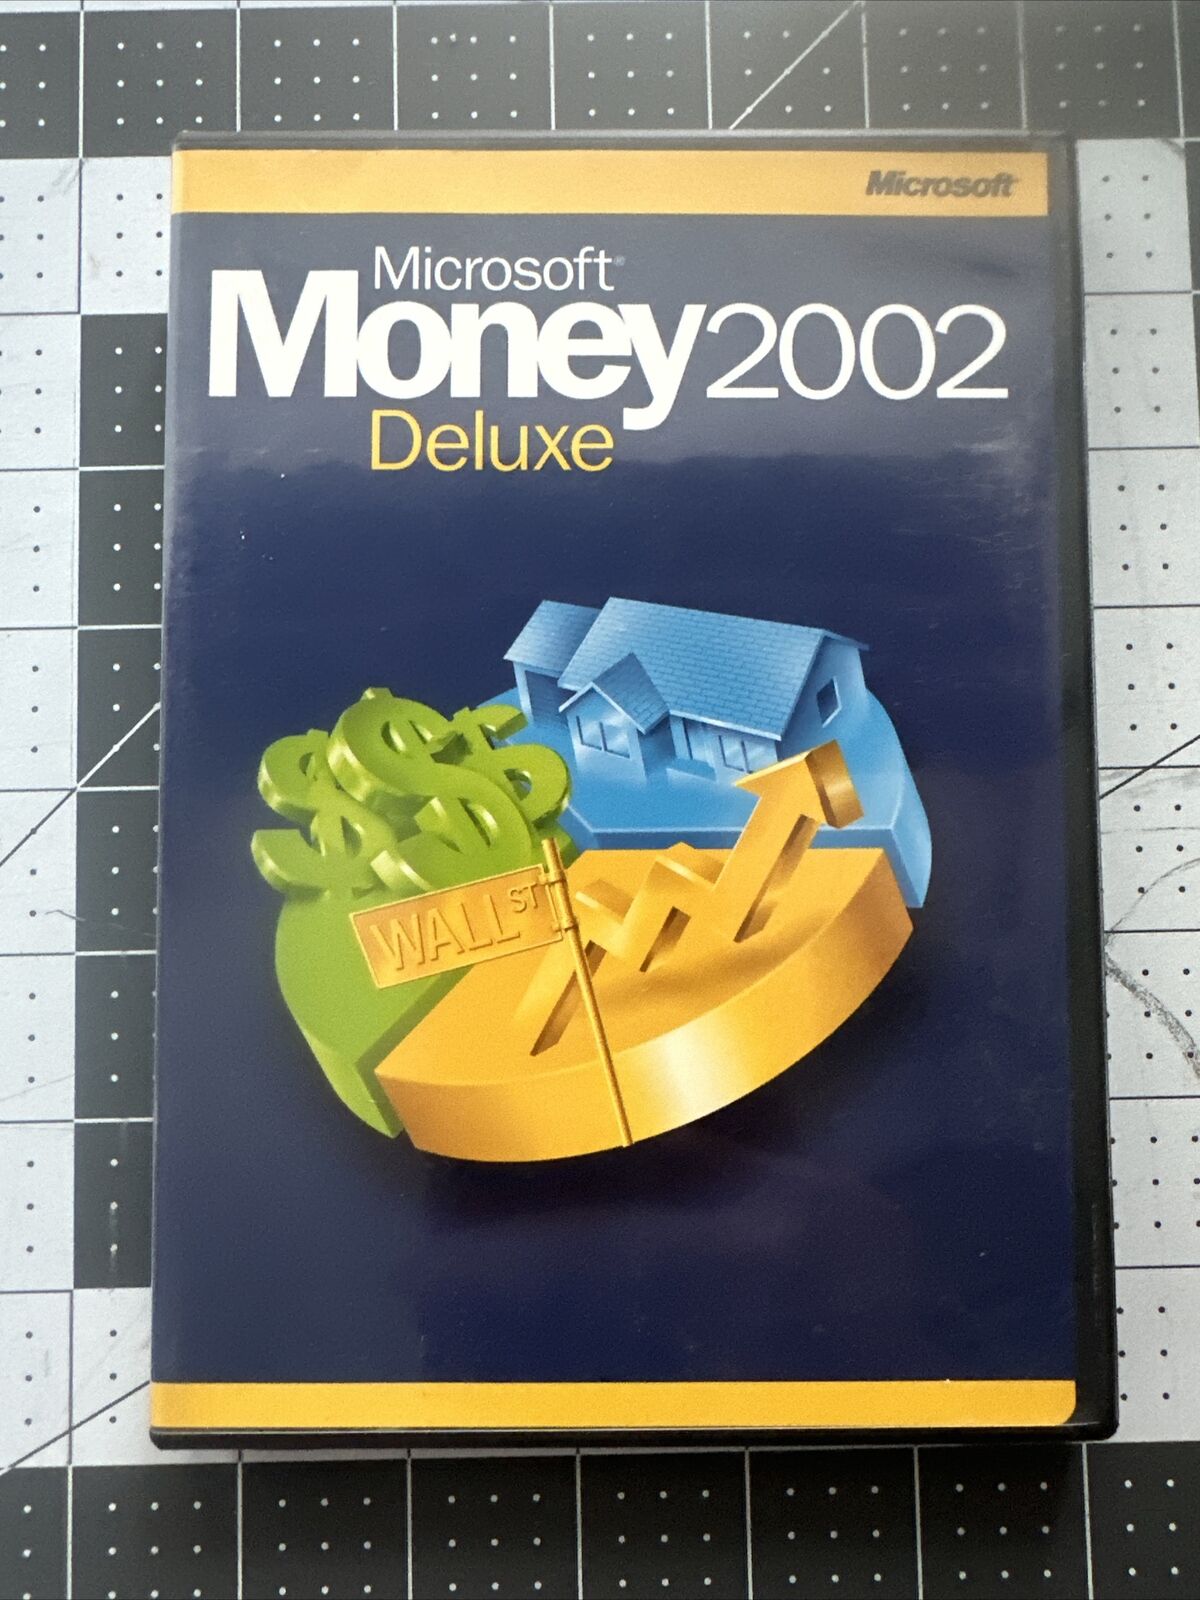 Microsoft Money 2002 Deluxe & Business Managing Small Business Finances w/Guide